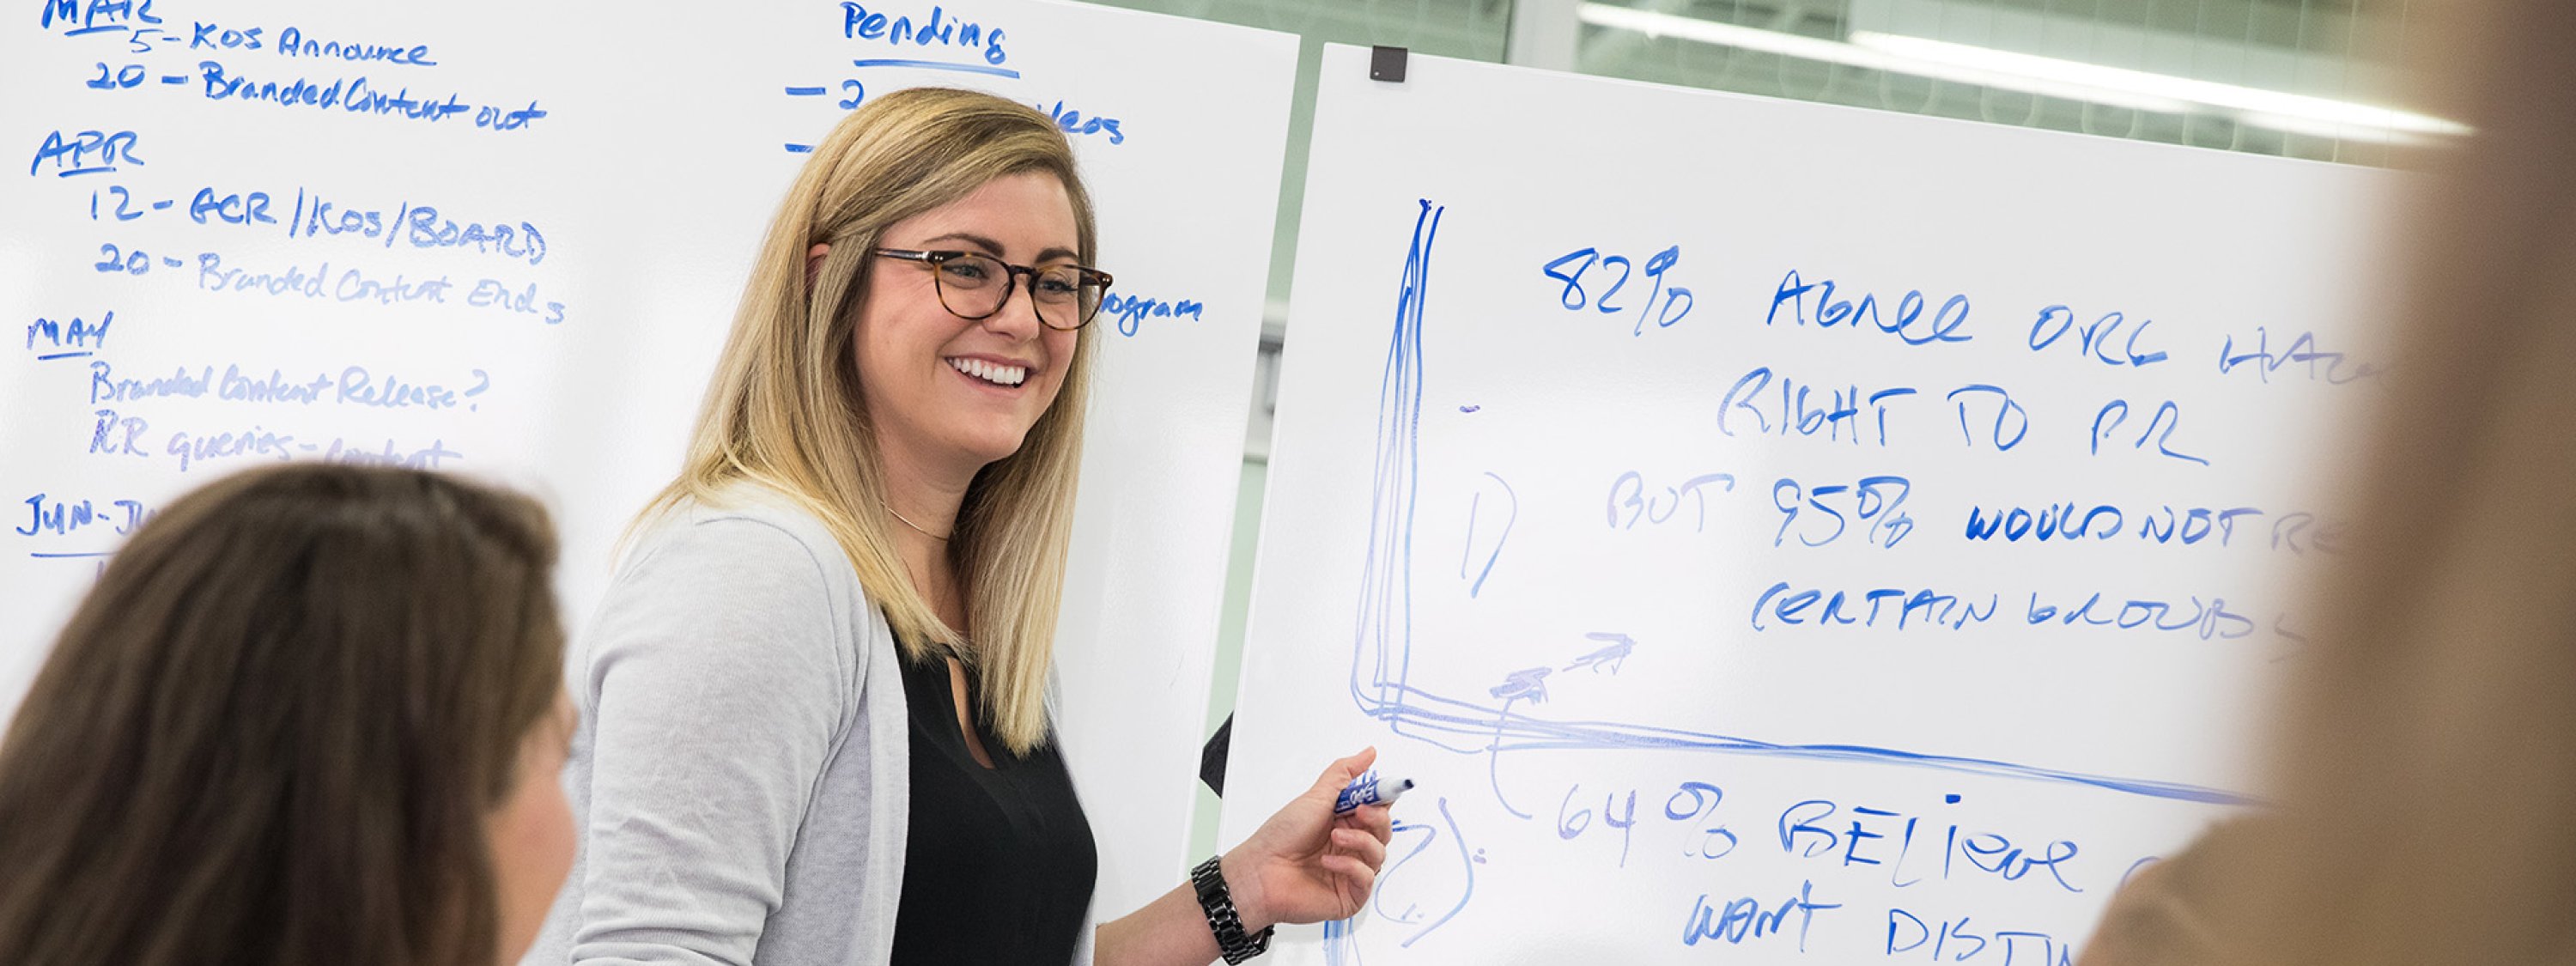 Photo of a person drawing on a whiteboard and pointing to it